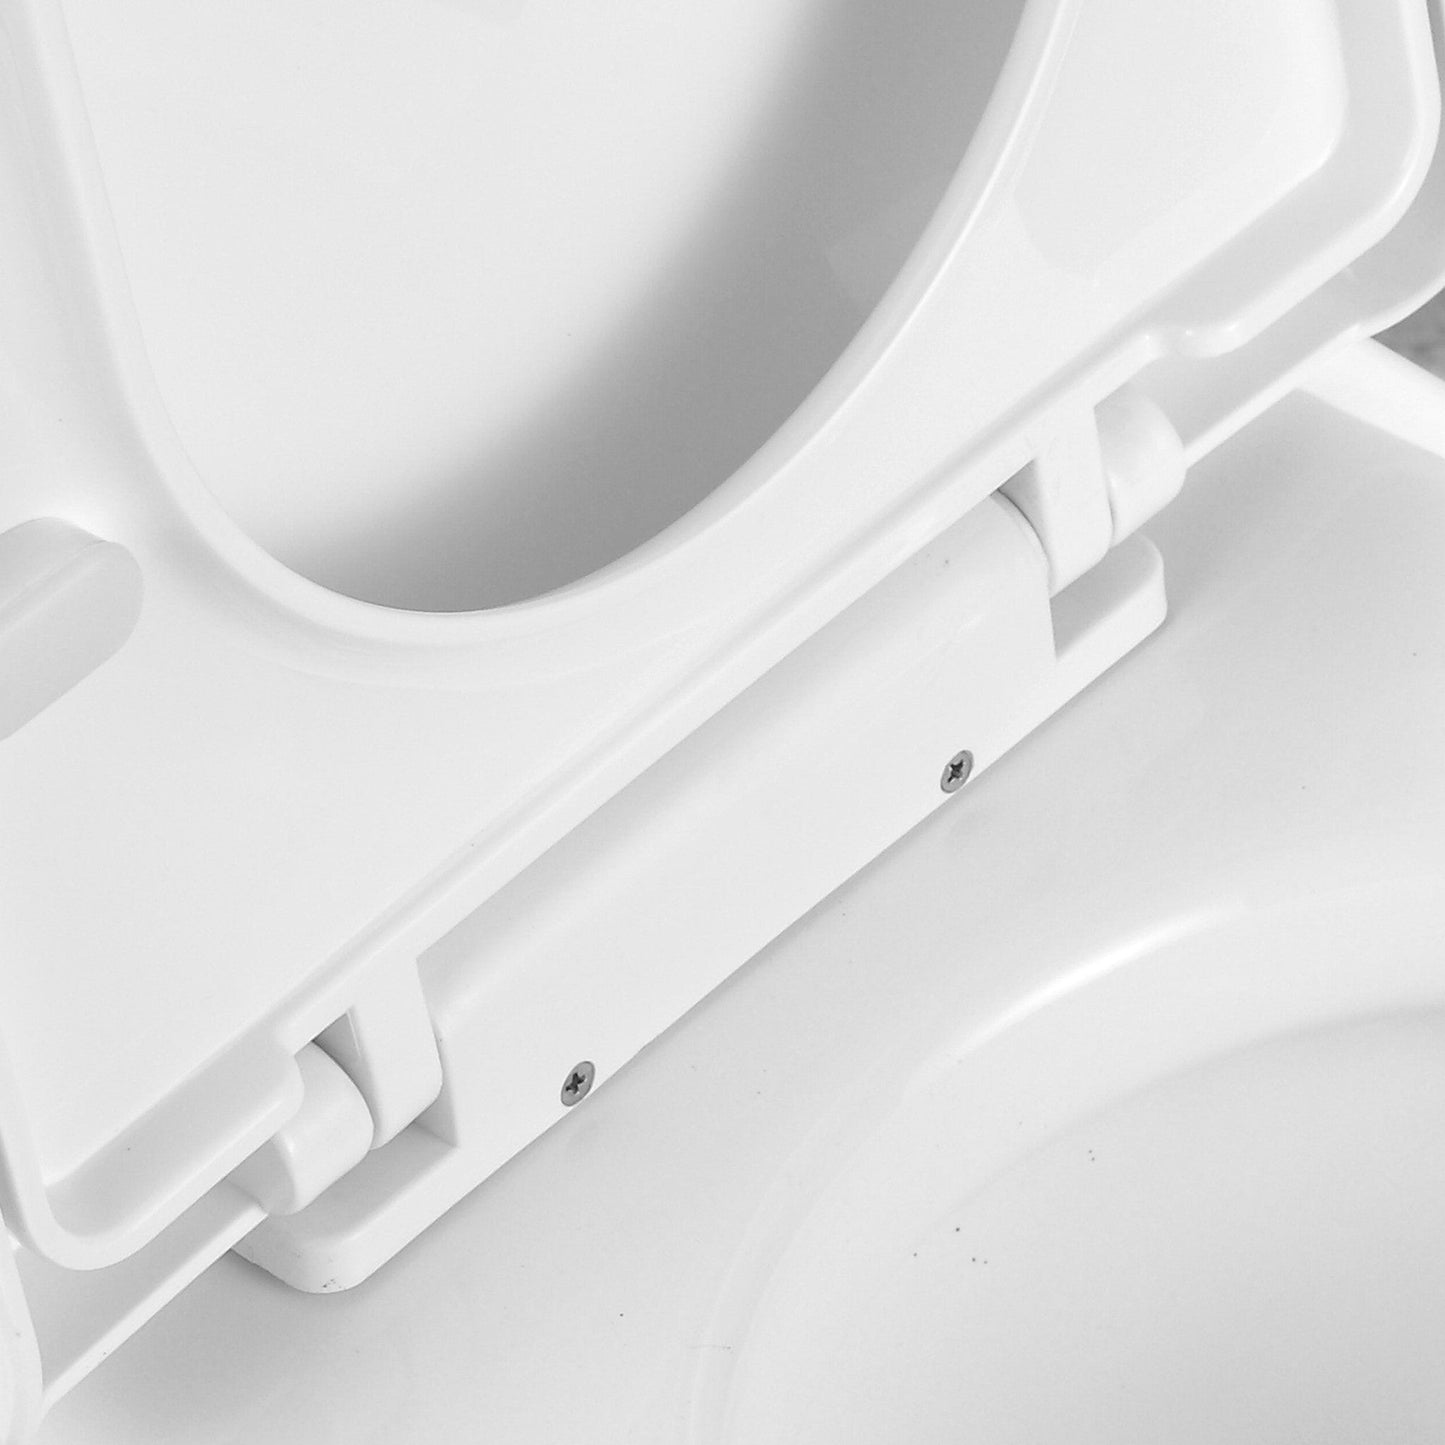 DeerValley Liberty 10" Rough-in Dual-Flush Elongated White One-Piece Toilet With Soft Closing Seat